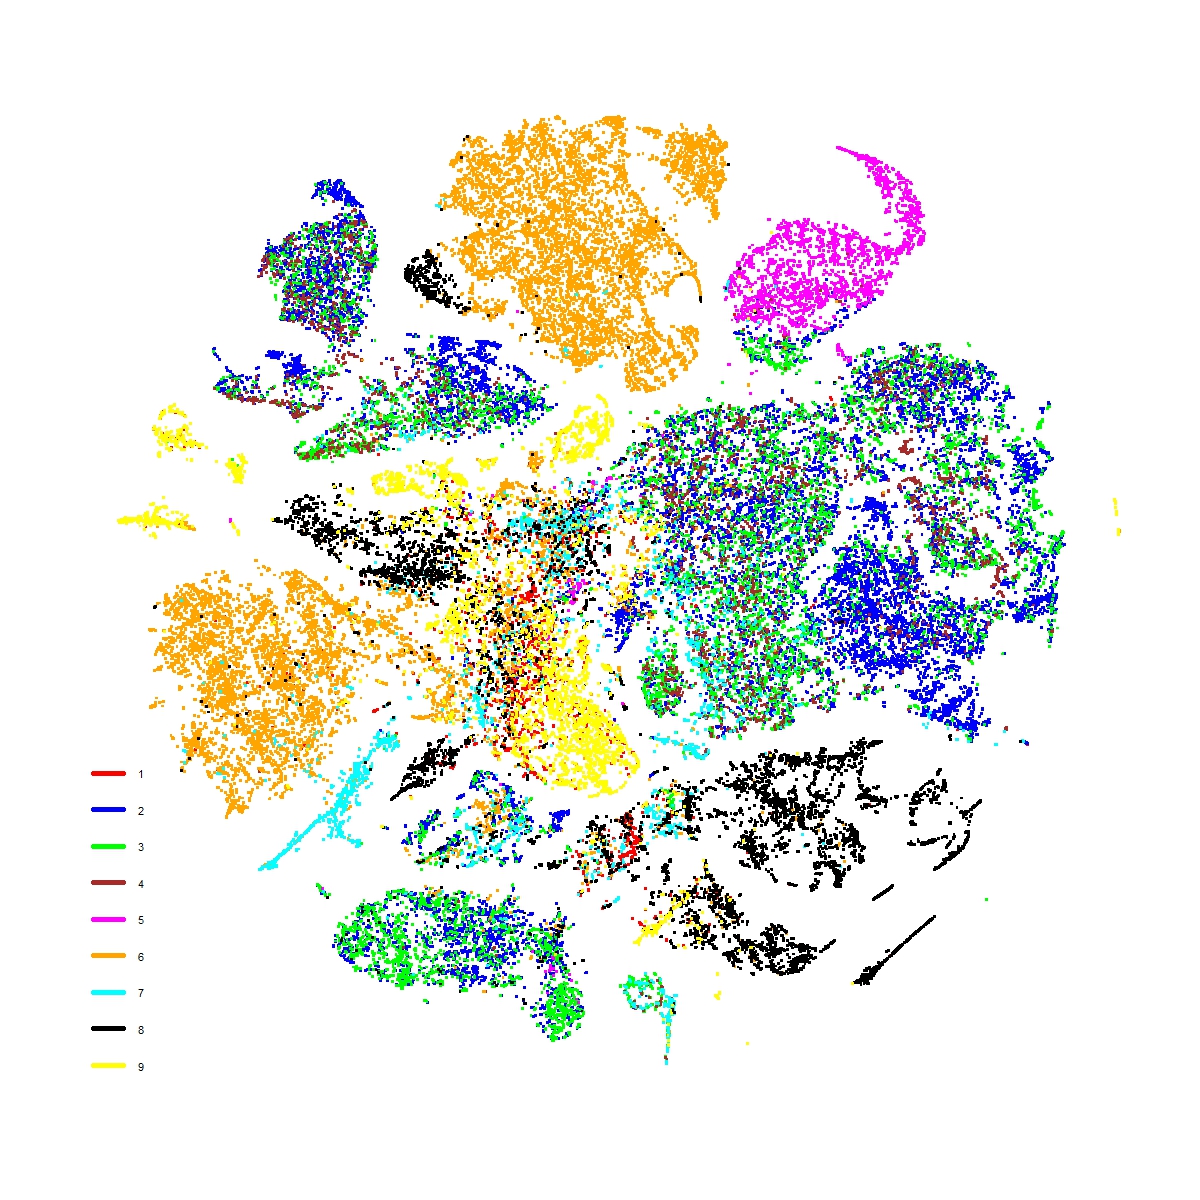 t-SNE Plot of the Otto Group Challenge